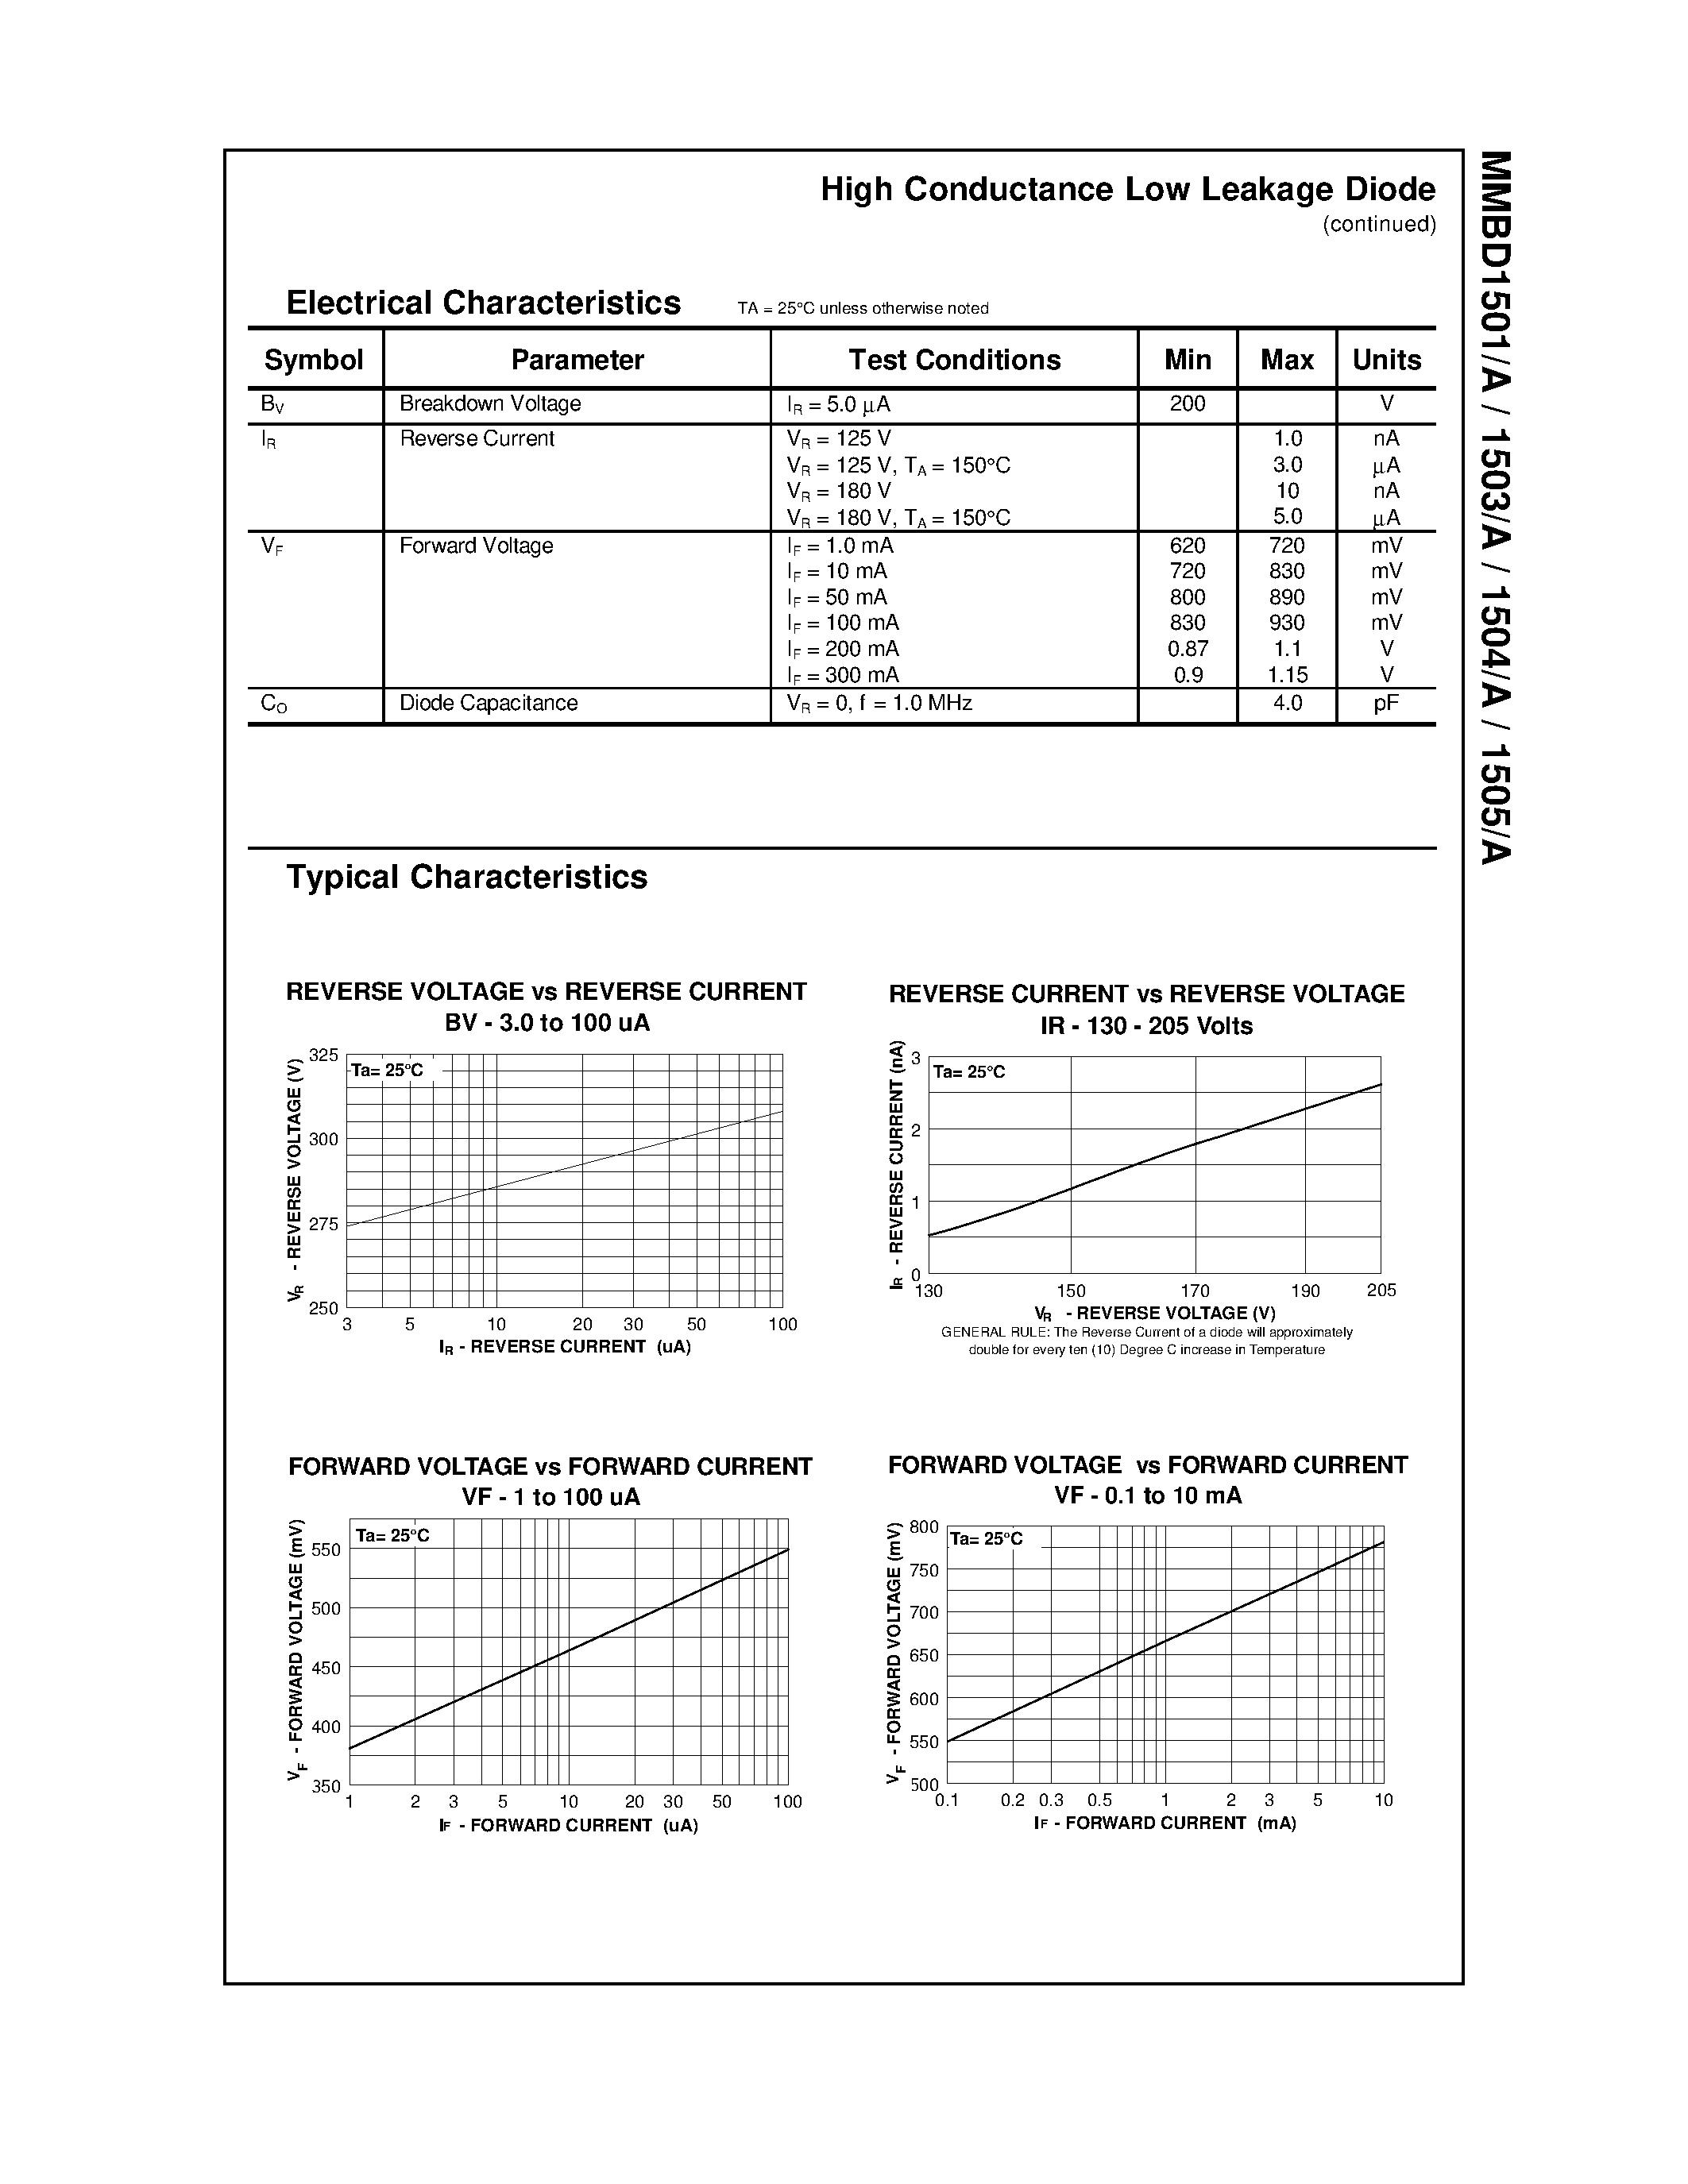 Datasheet MMBD1504A - High Conductance Low Leakage Diode page 2